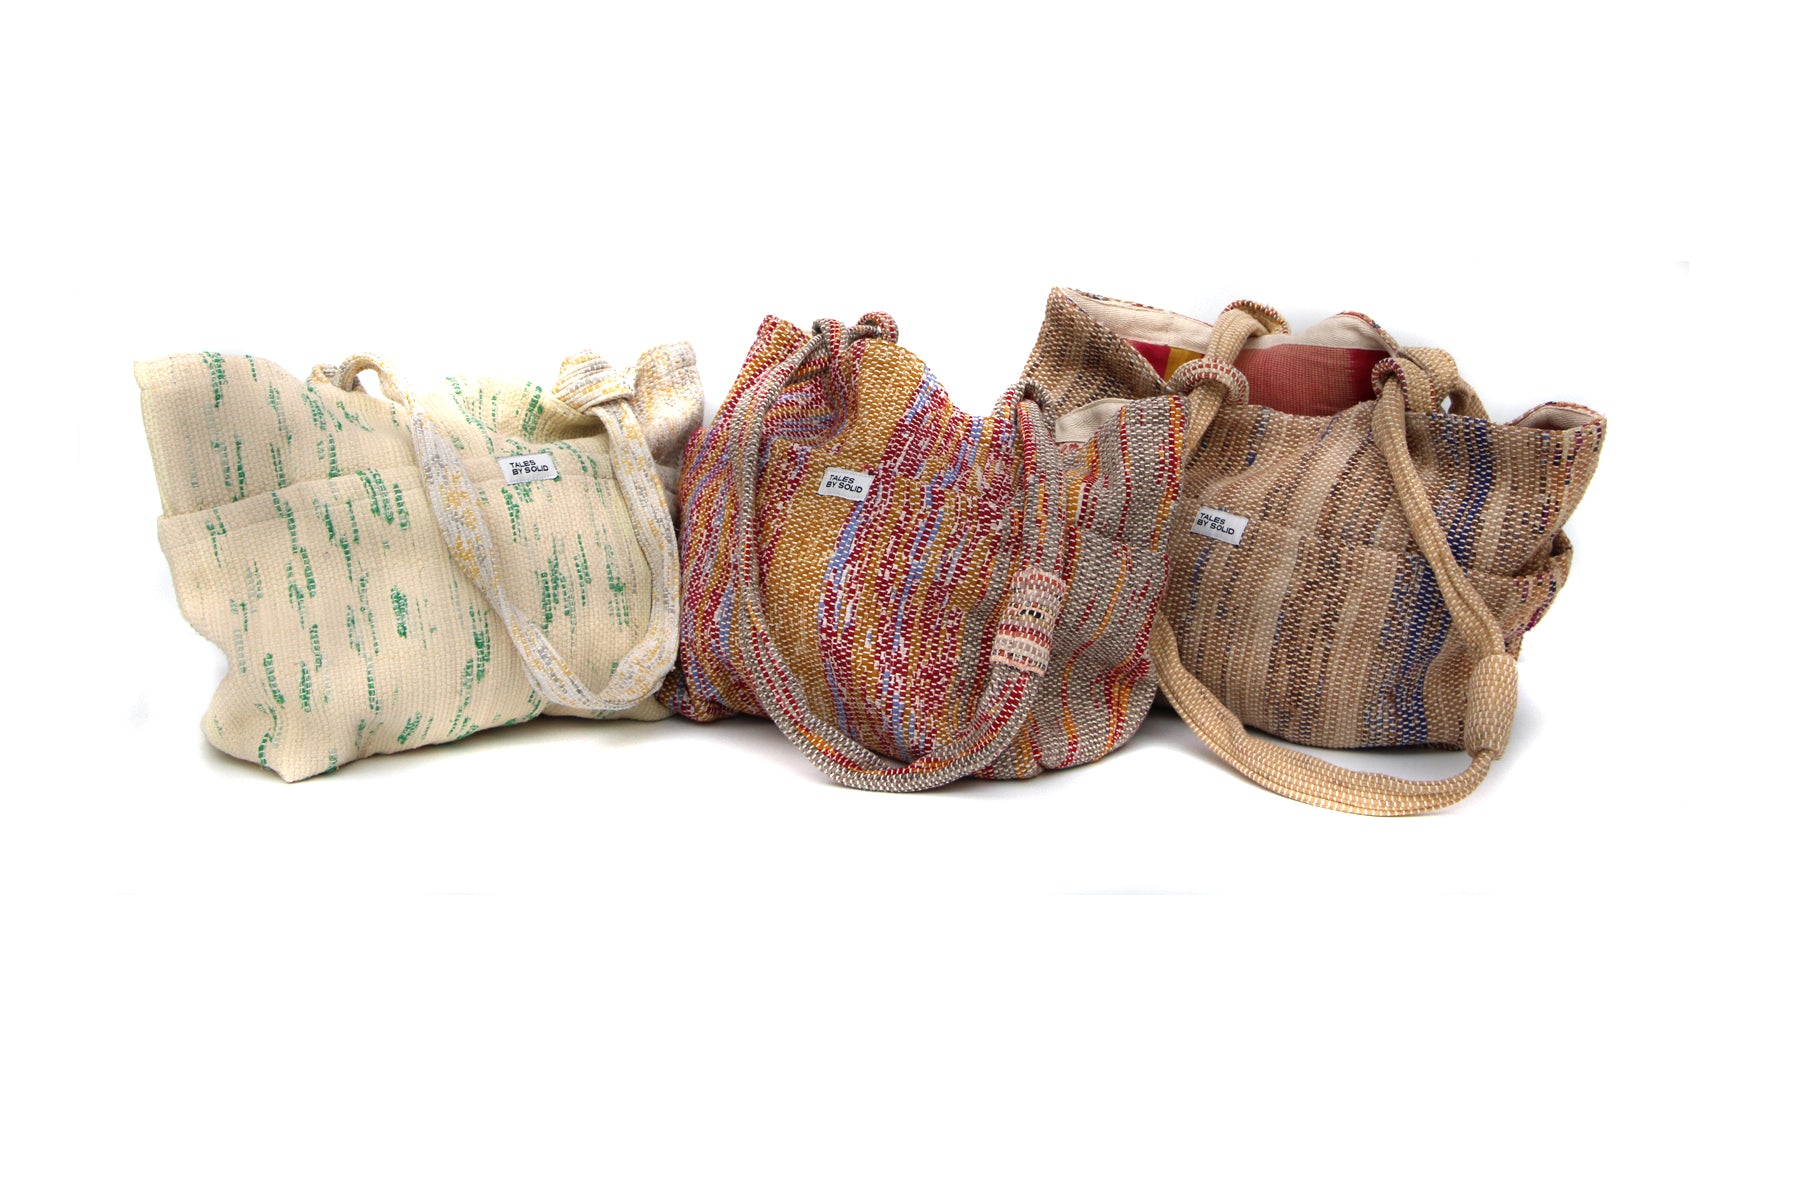 Small Sari Bag 05 - Handcrafted Elegance with a Sustainable Story